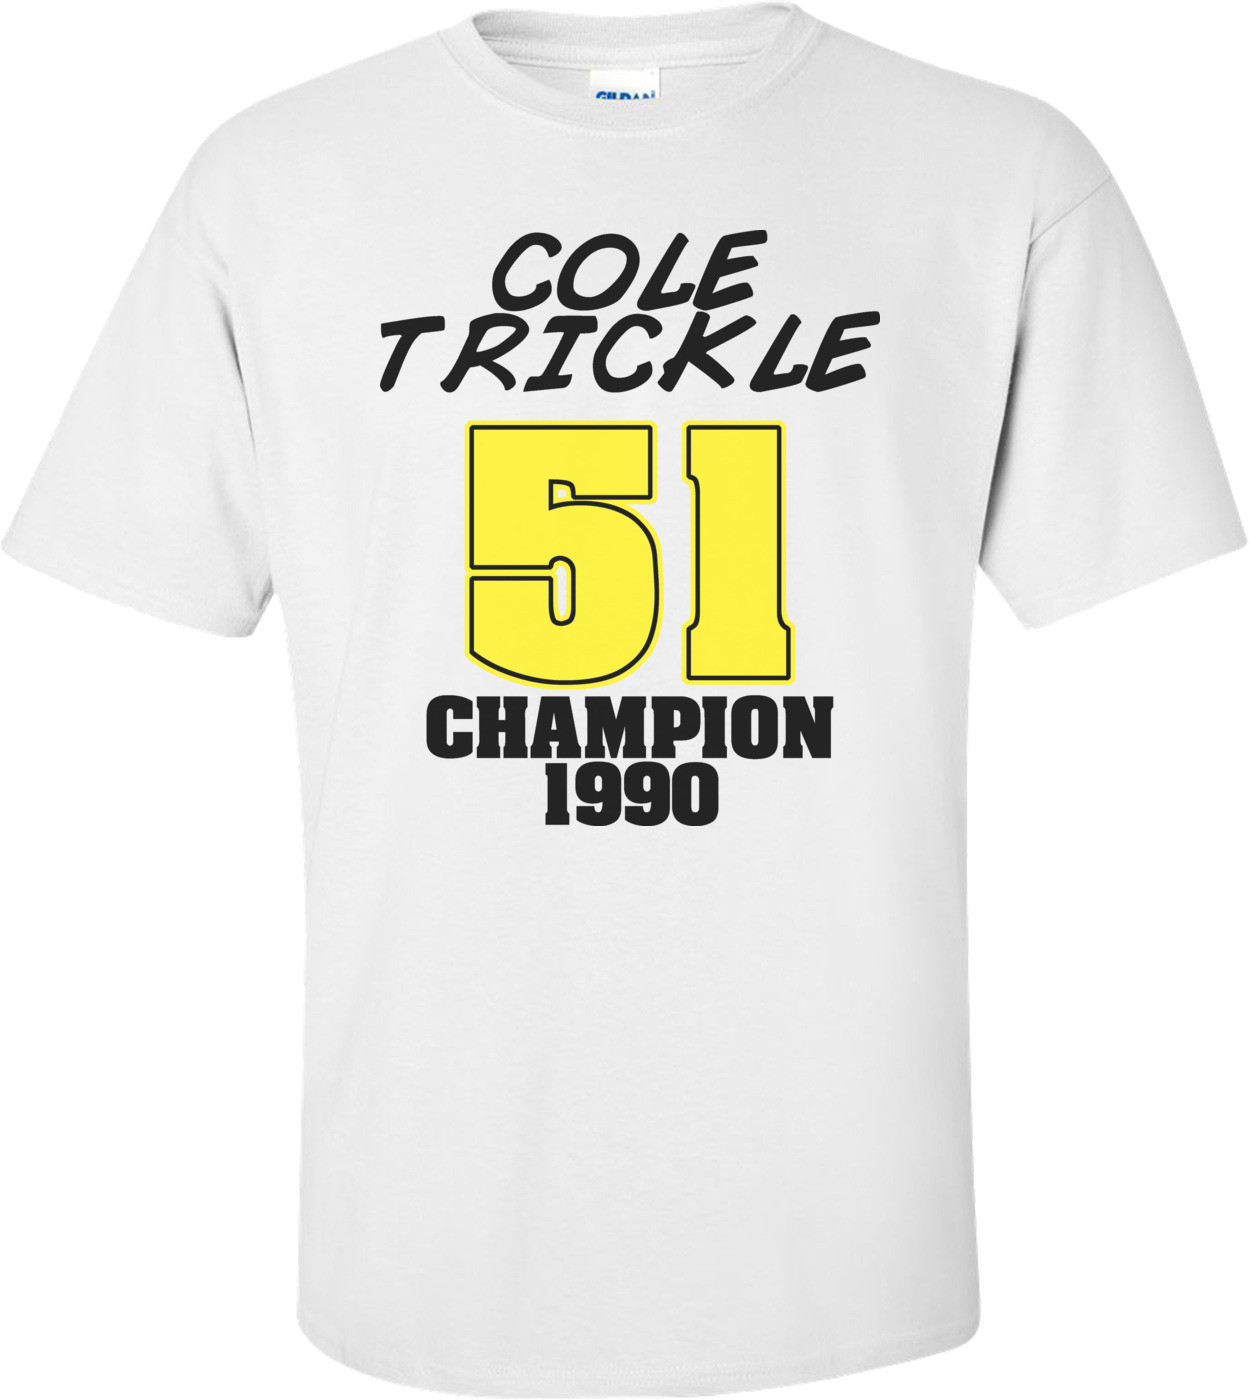 Cole Trickle Days Of Thunder